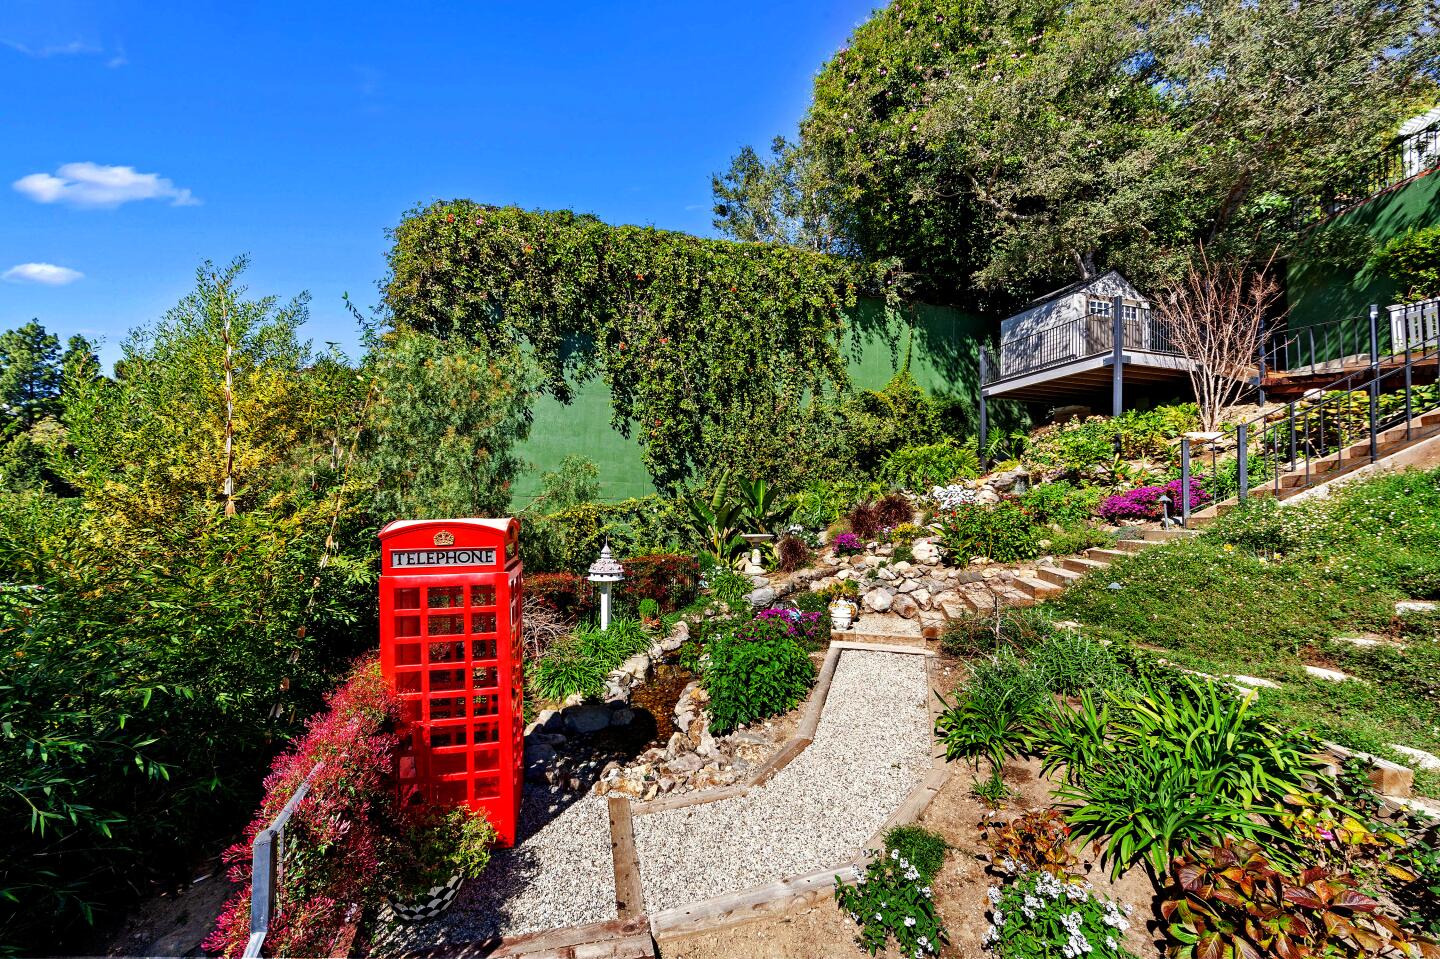 Nigel Lythgoe's property overlooks the Bel-Air Country Club golf course. It includes a 1930s residence and a two-story guesthouse. The verdant backyard has tiered gardens and a bright red phone booth.